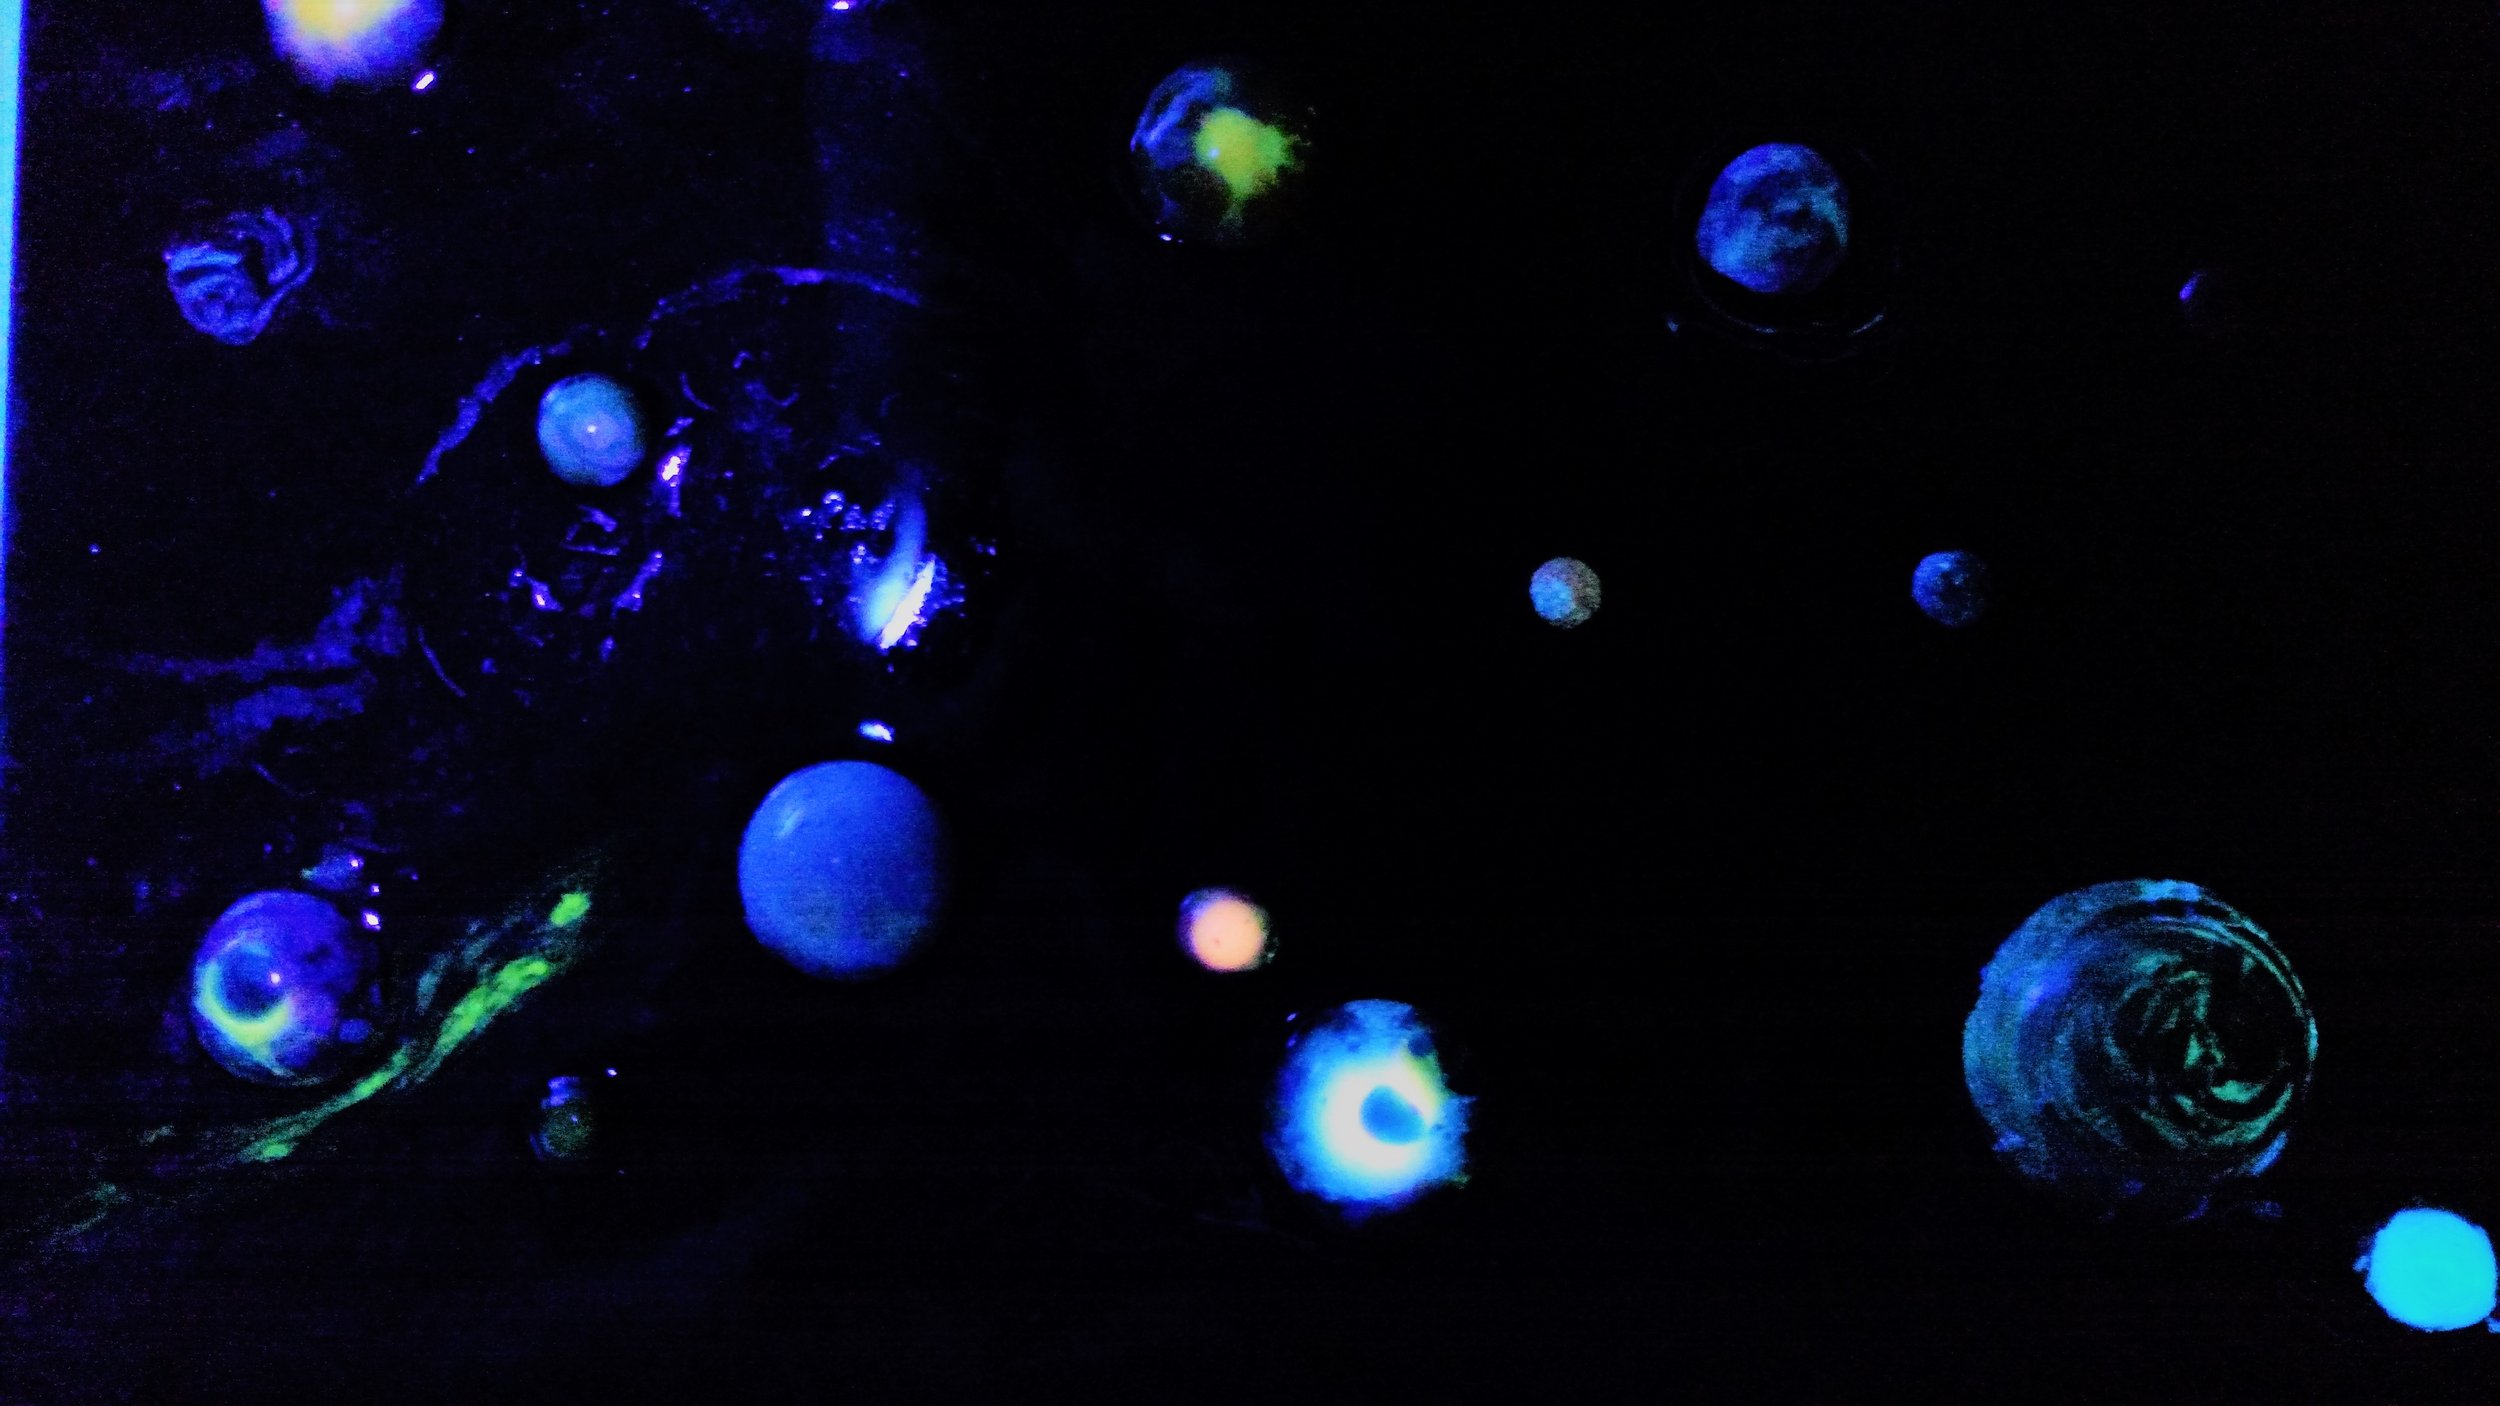 Stars and planets glow, use the included blacklight flashlight to "charge" your planets.